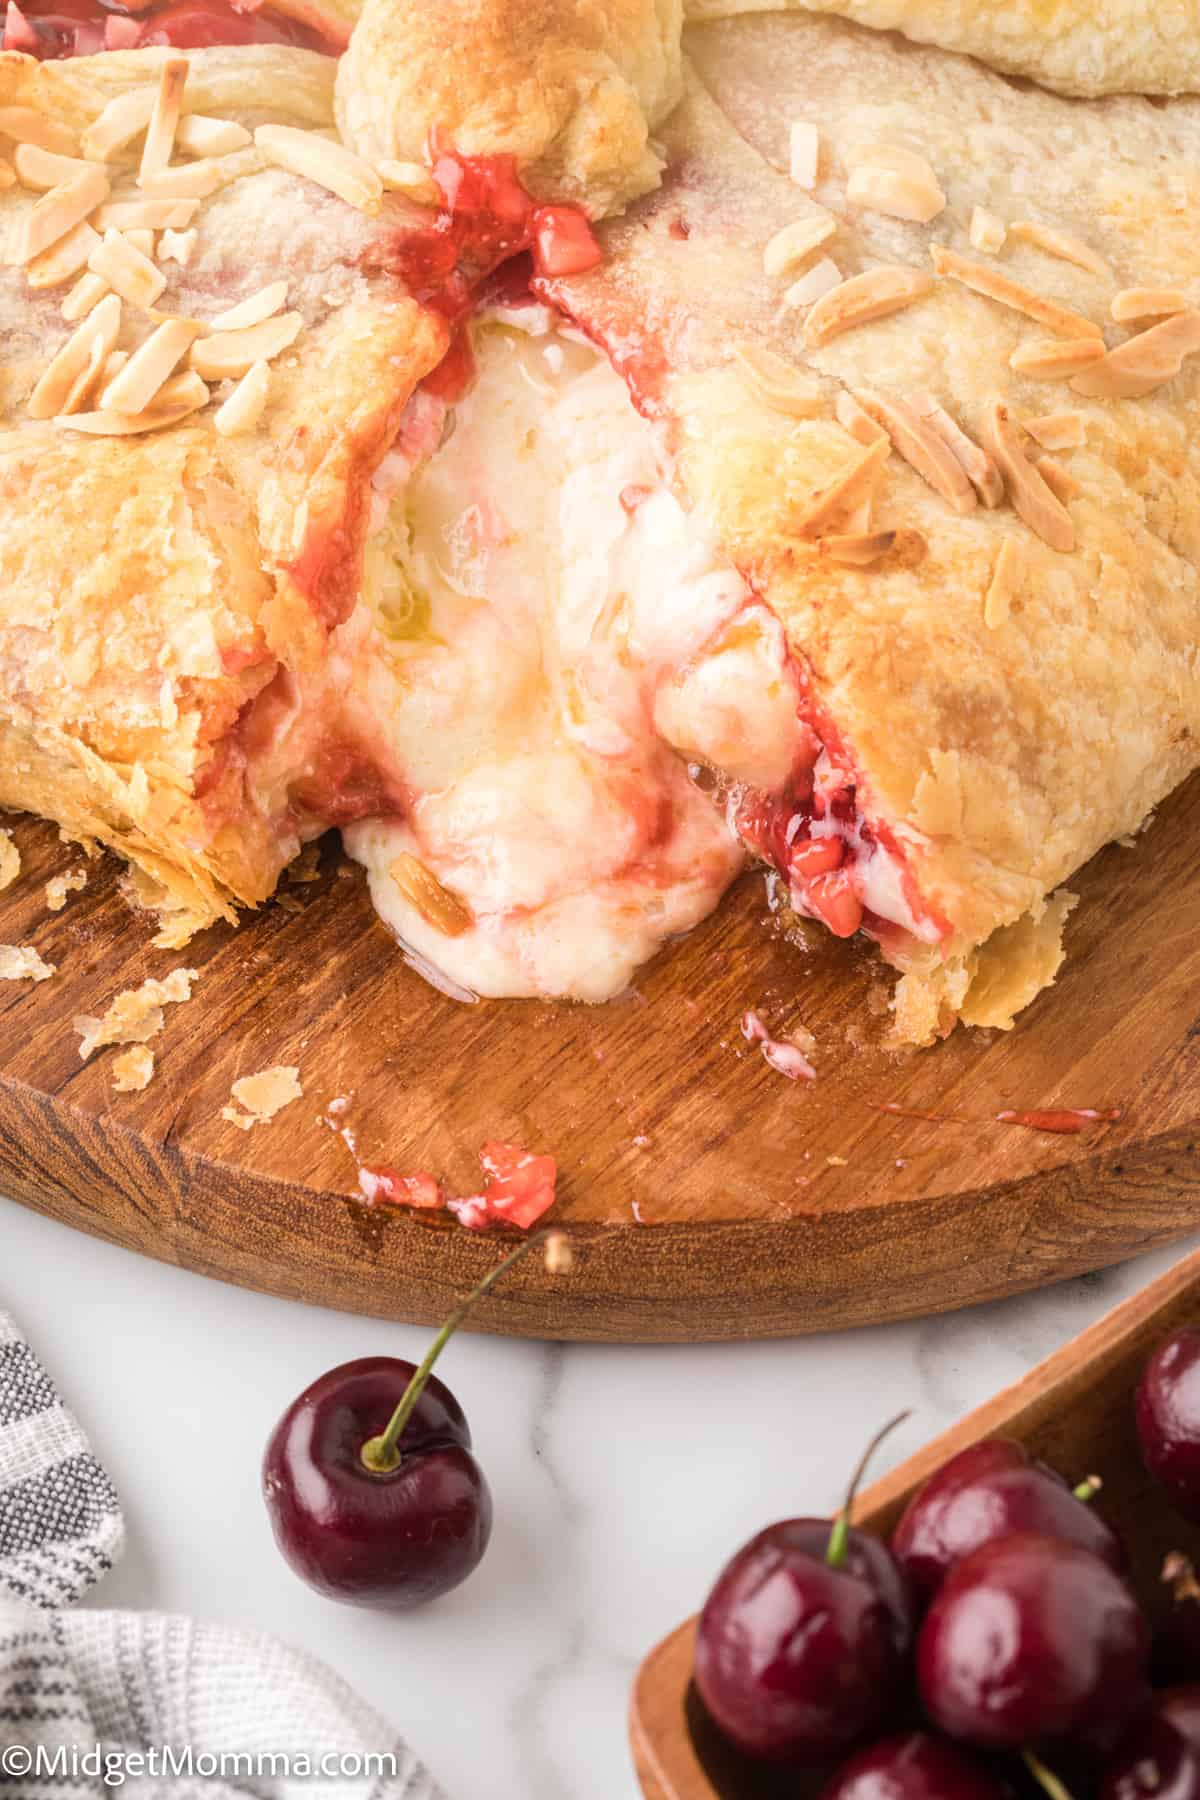 Cherry Baked Brie Recipe